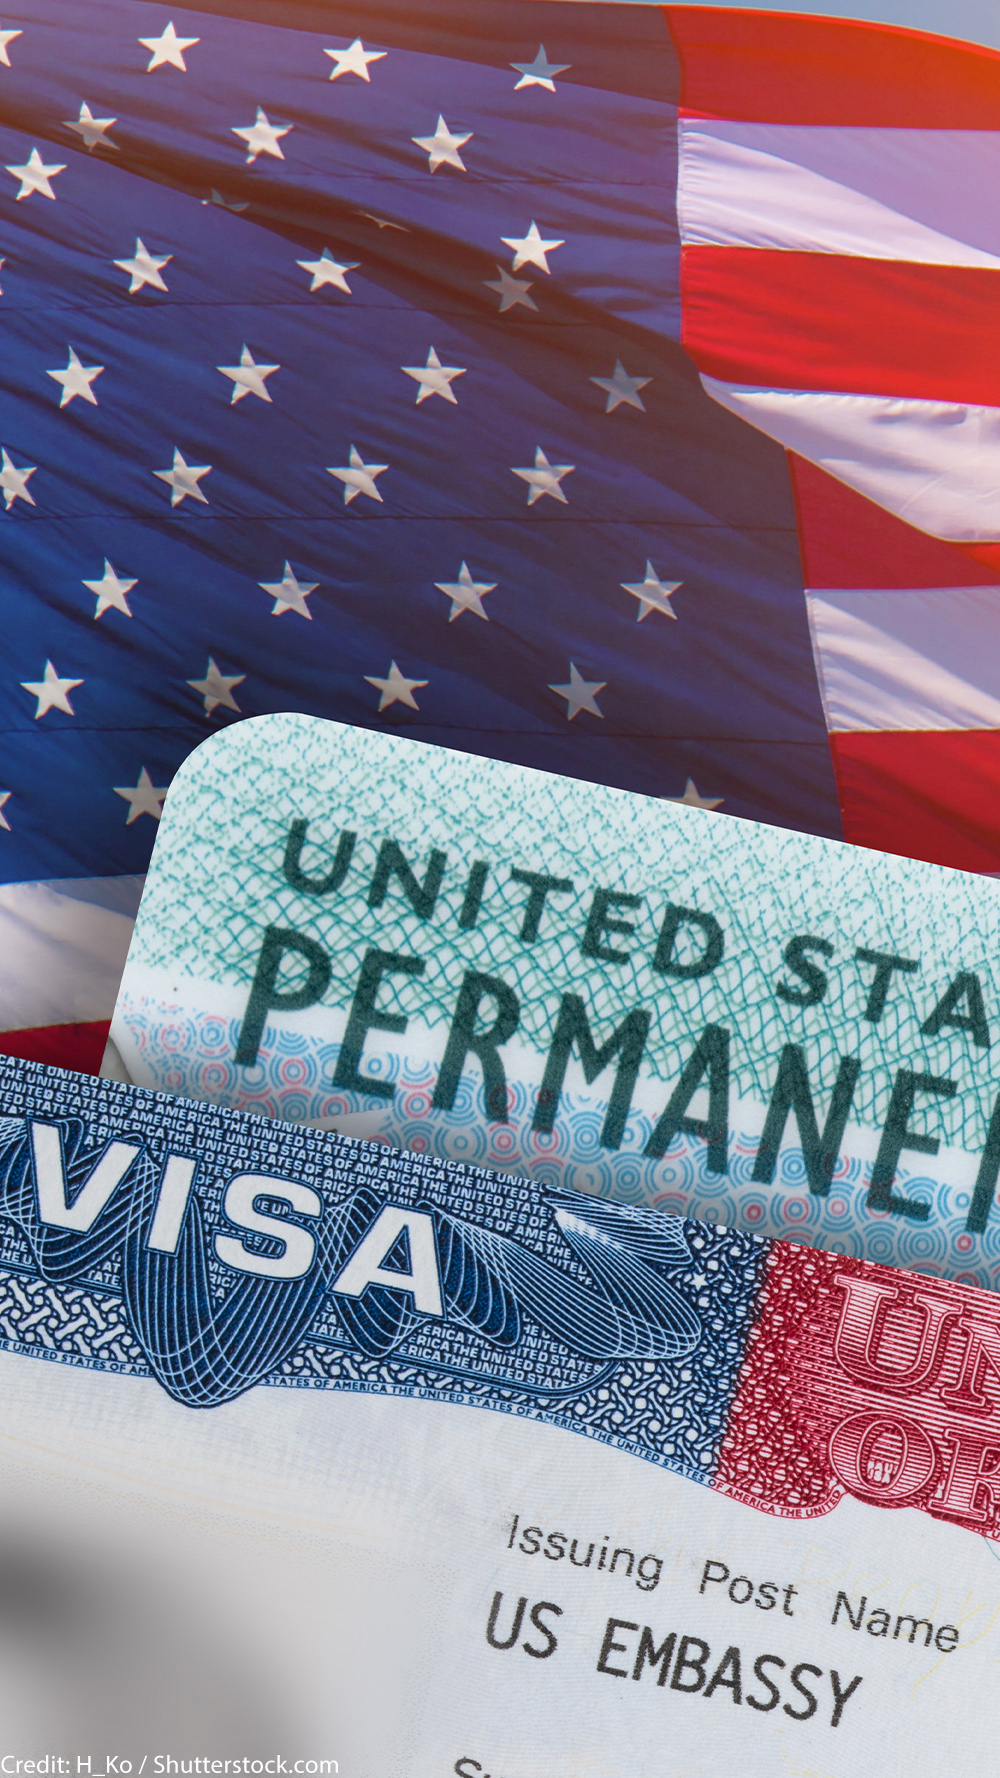 U.S. visa and Permanent Resident Green Card.